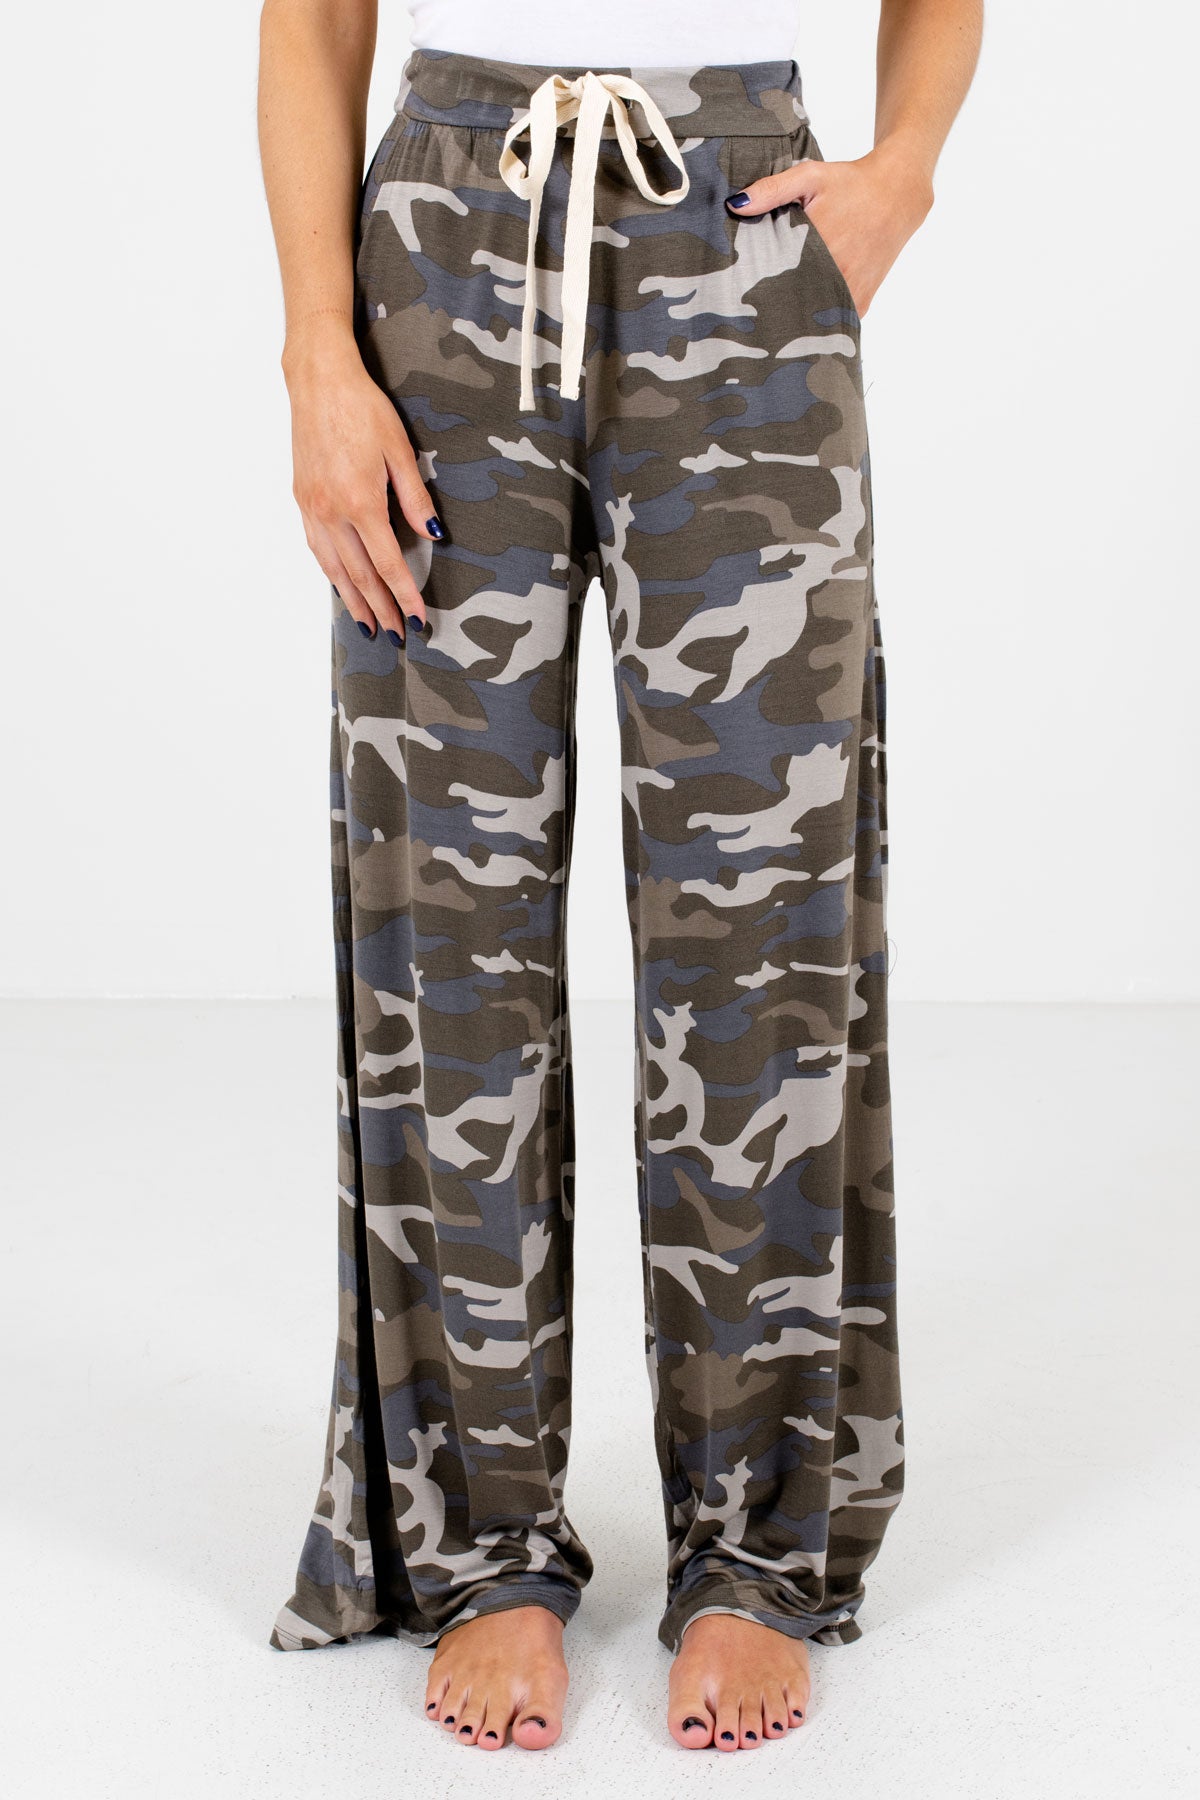 Green Camouflage Print Boutique Pants for Women